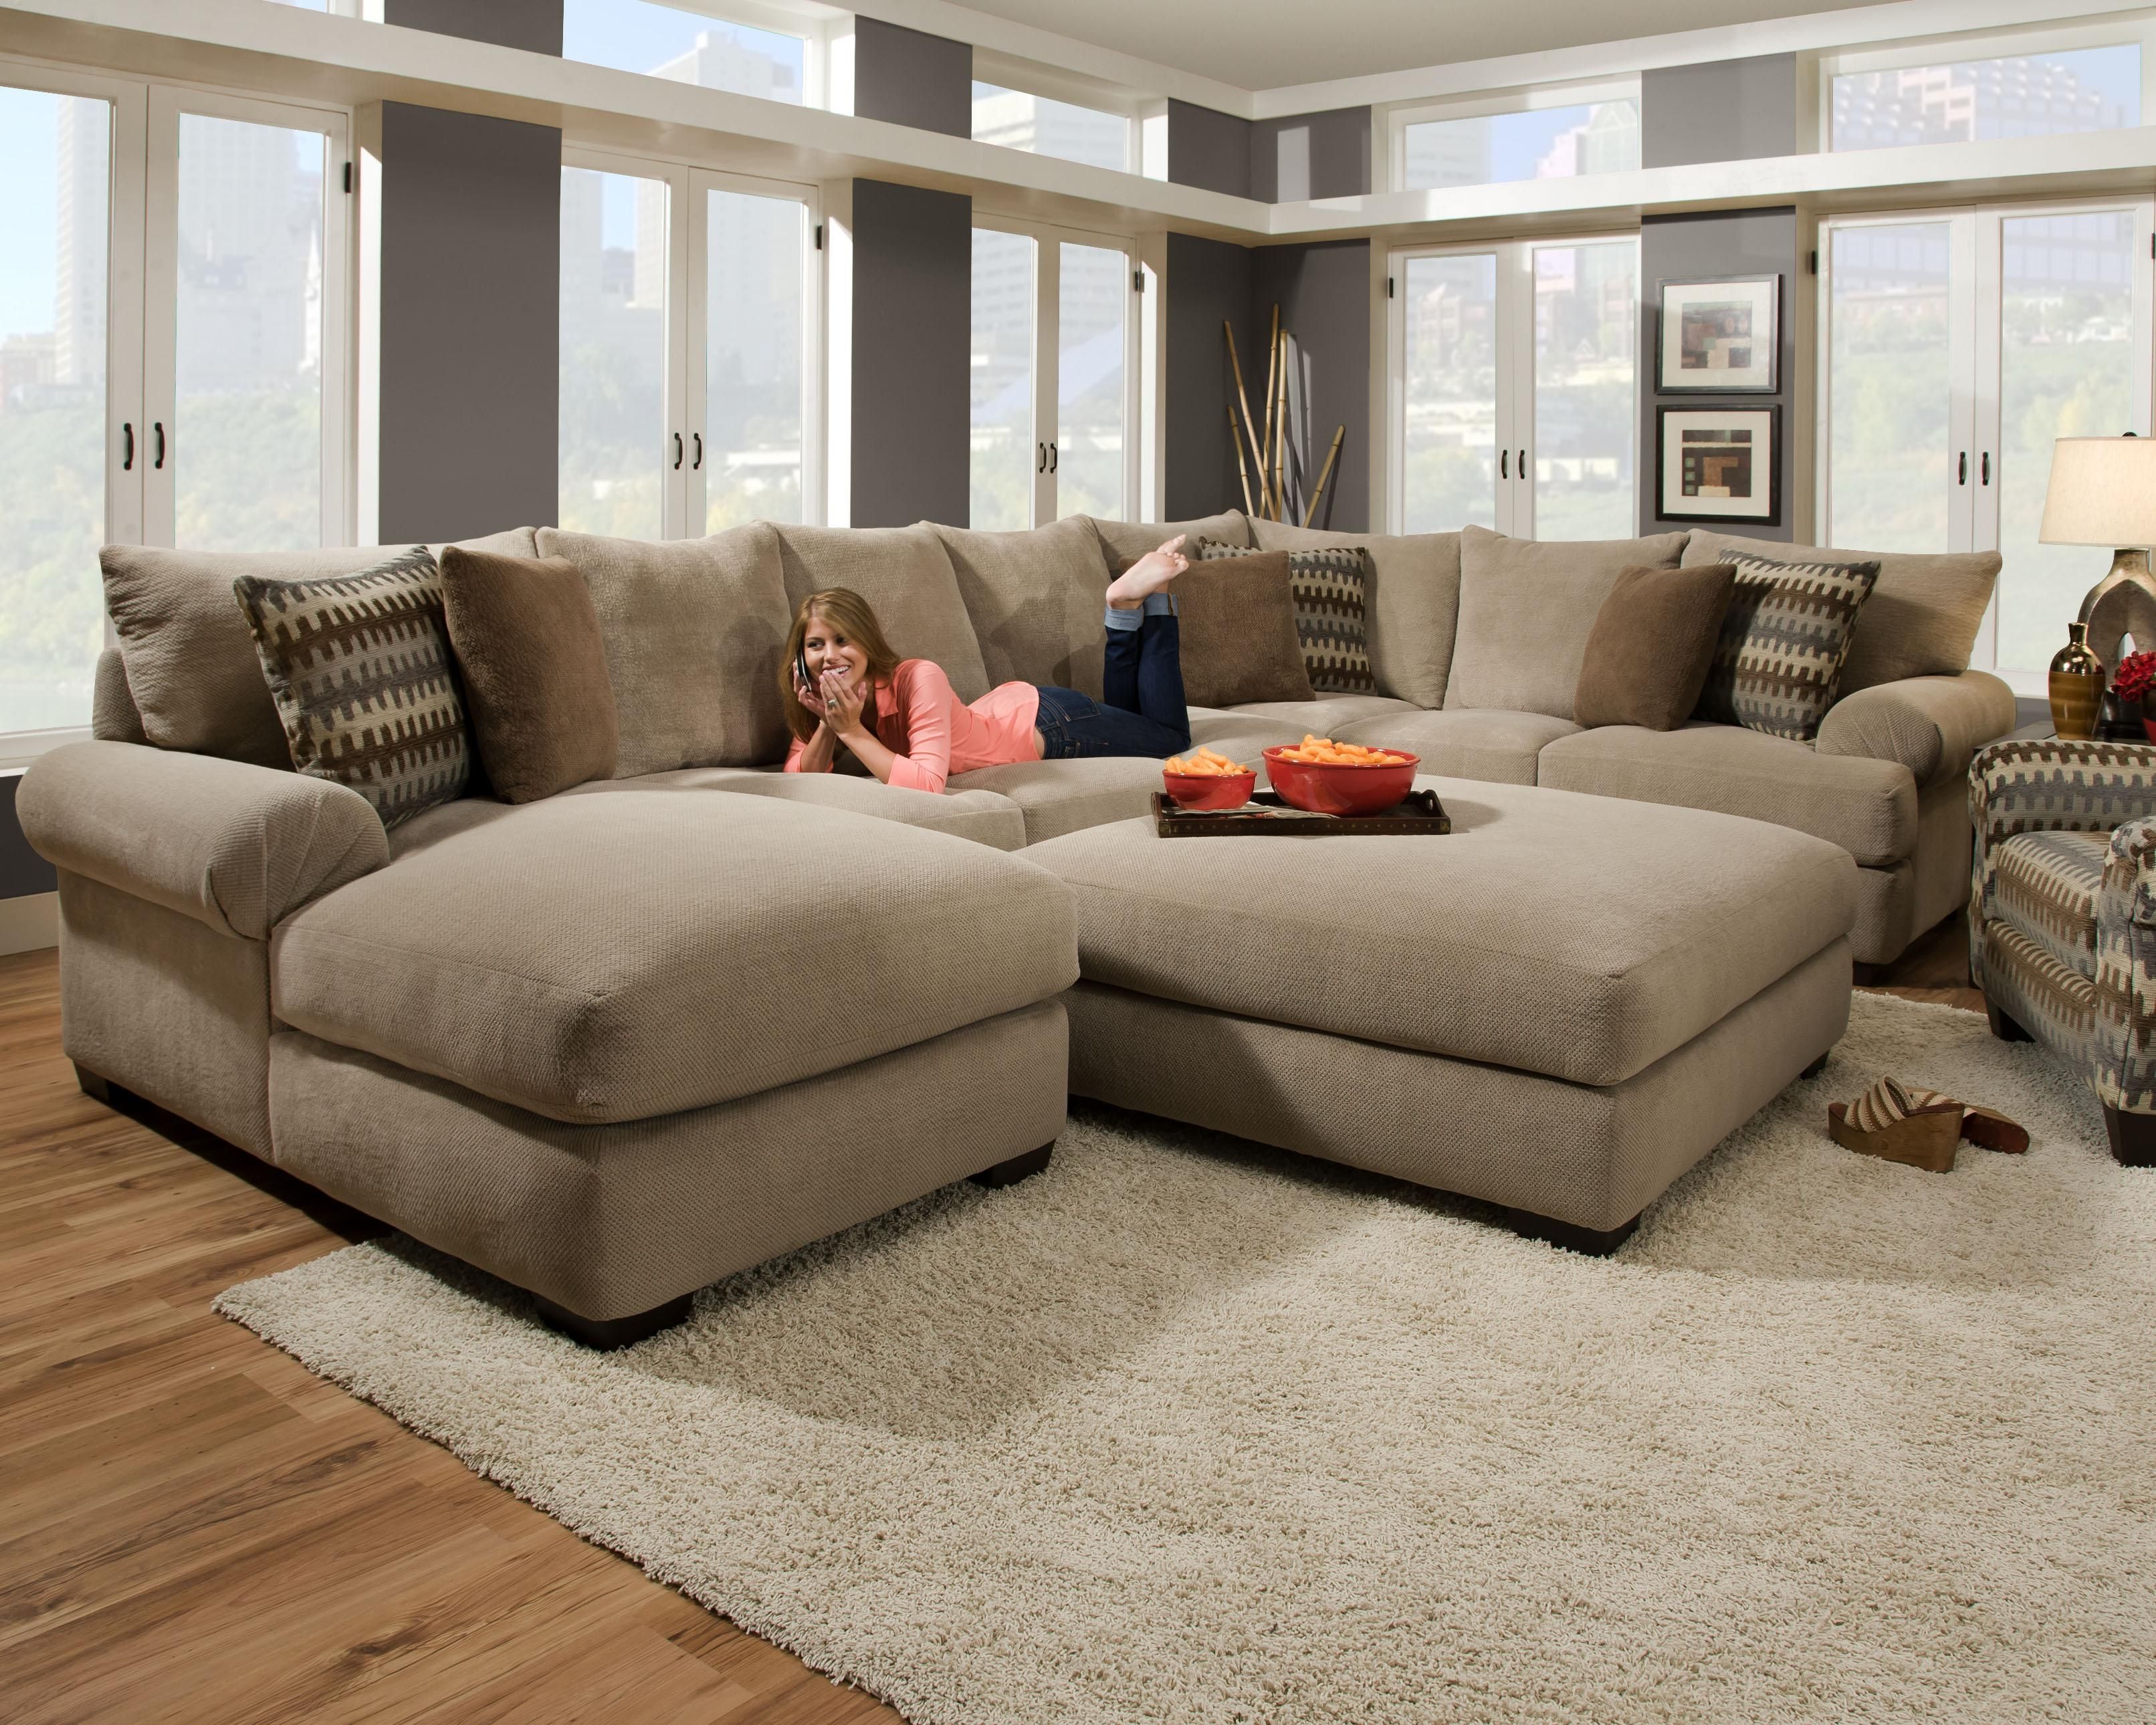 Comfy Sectional Sofas Tourdecarroll Intended For Comfy Sectional Sofa (View 2 of 12)